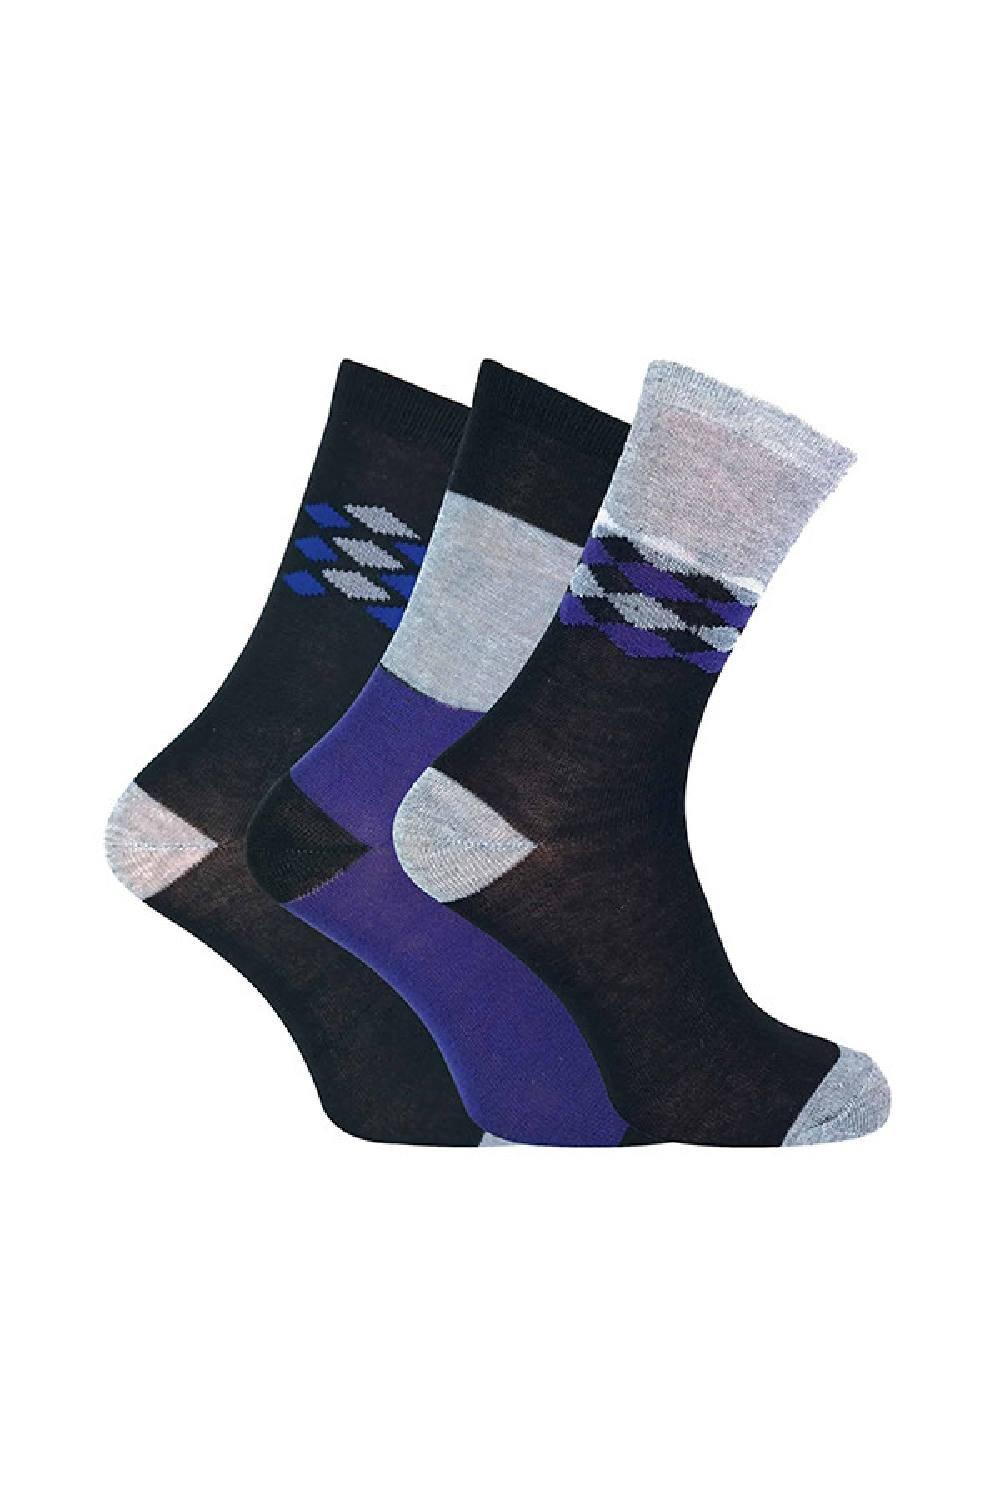 6 Pack Patterned Blue Argyle Striped Socks with Comfort Toe Seams